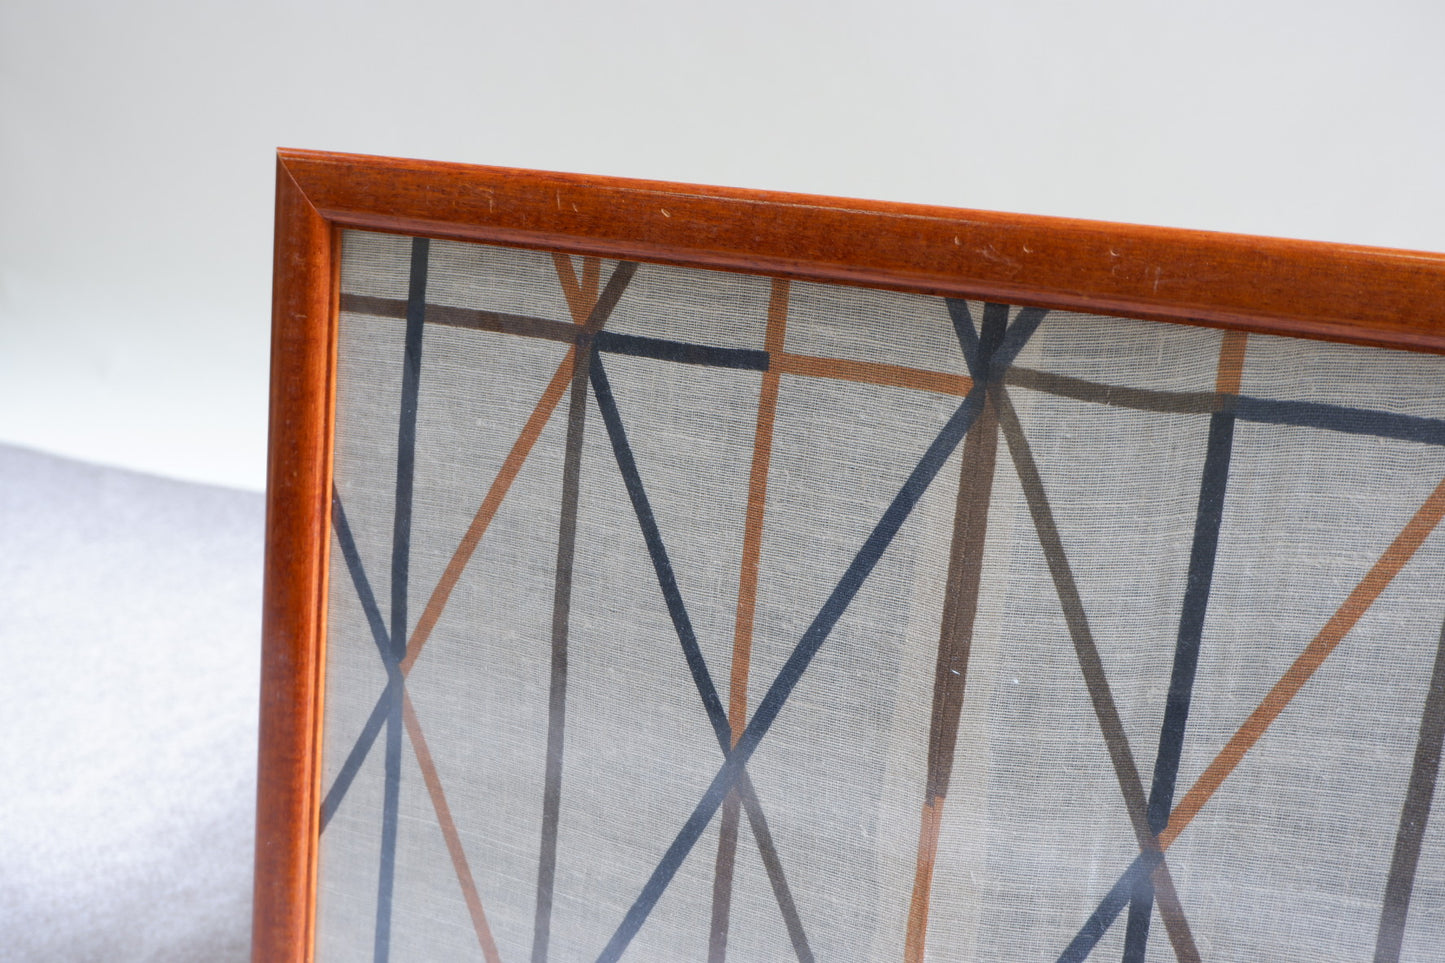 Product photo of "Herman Miller TEXTILES ZEELAND MICH designed by Alexander Girard No.472 Grid” of THE ONE&ONLY